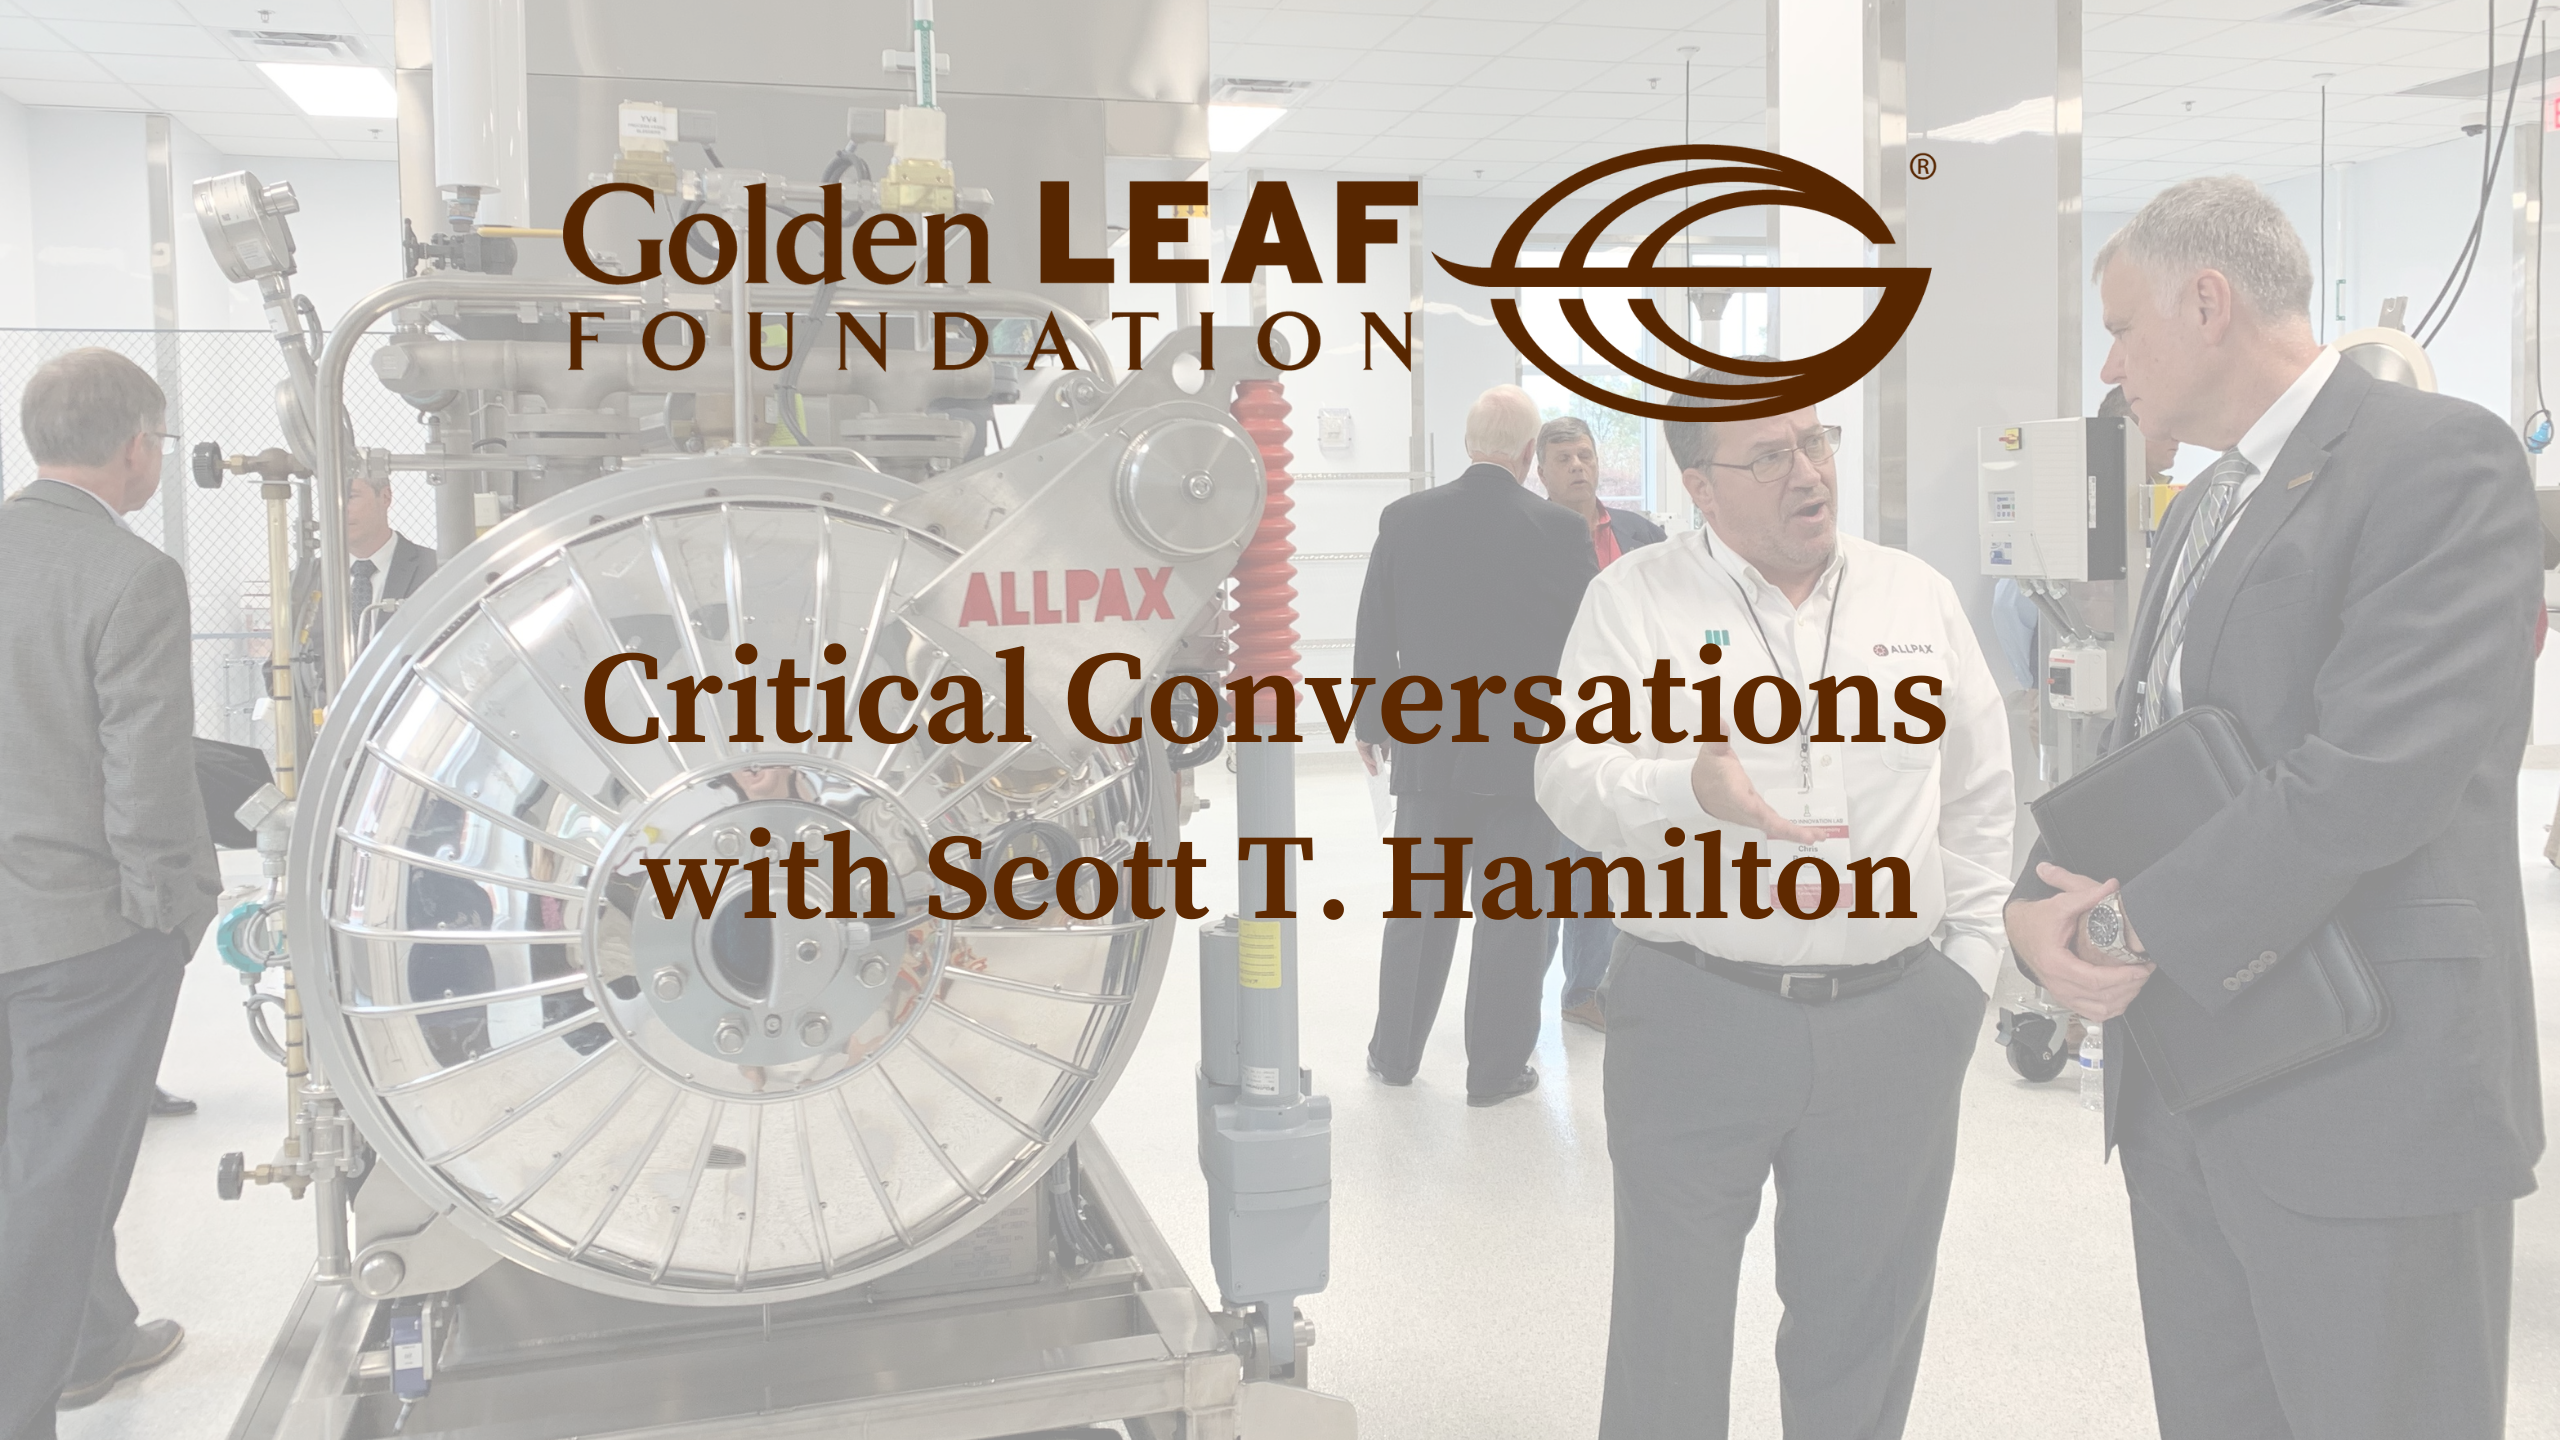 Critical Conversations with Scott T. Hamilton featuring Federal Co-Chair Gayle Conelly Manchin of ARC